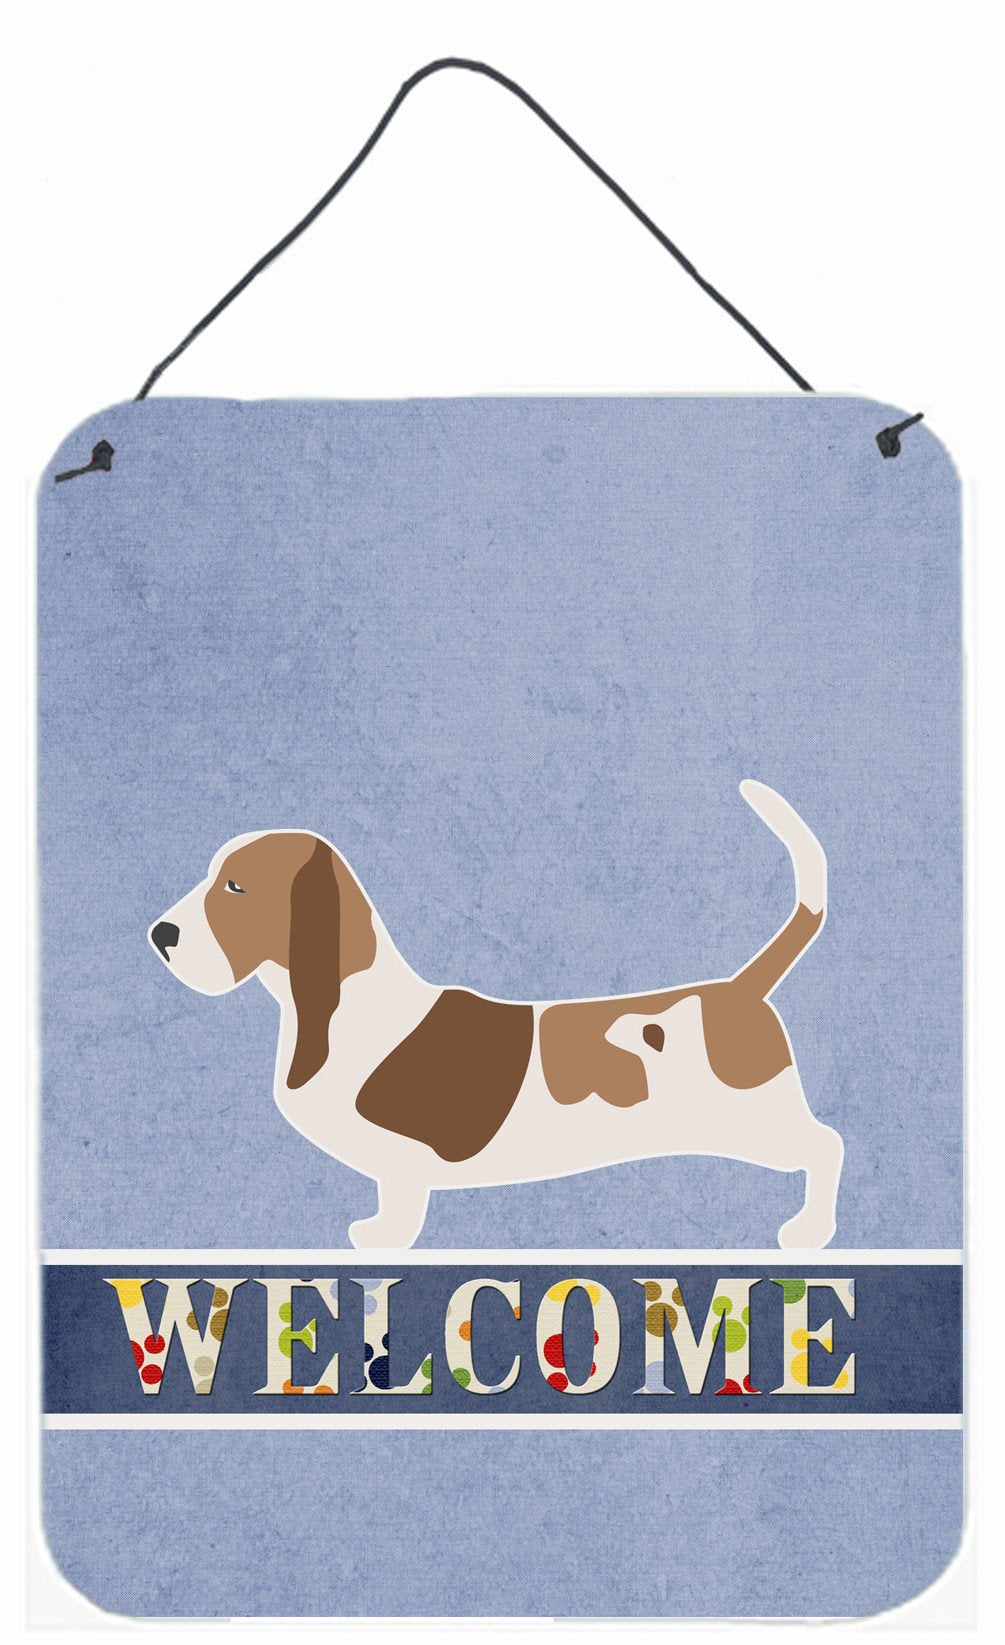 Basset Hound Welcome Wall or Door Hanging Prints BB5506DS1216 by Caroline's Treasures